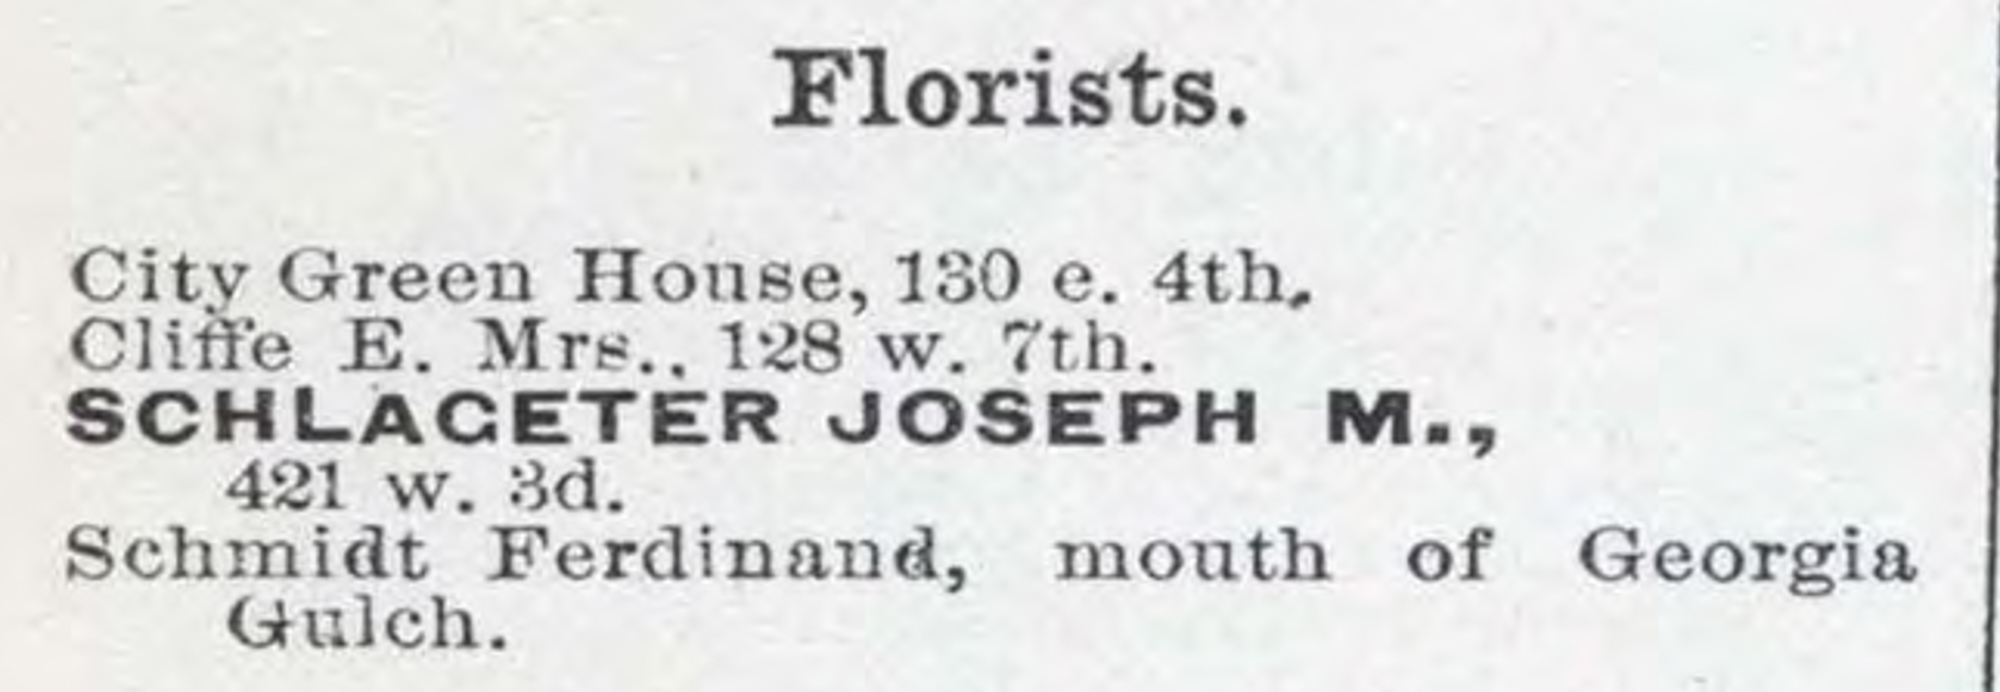 Dauth Family Archive - 1885 - Leadville Directory - Entry for Elisabeth Cliffe